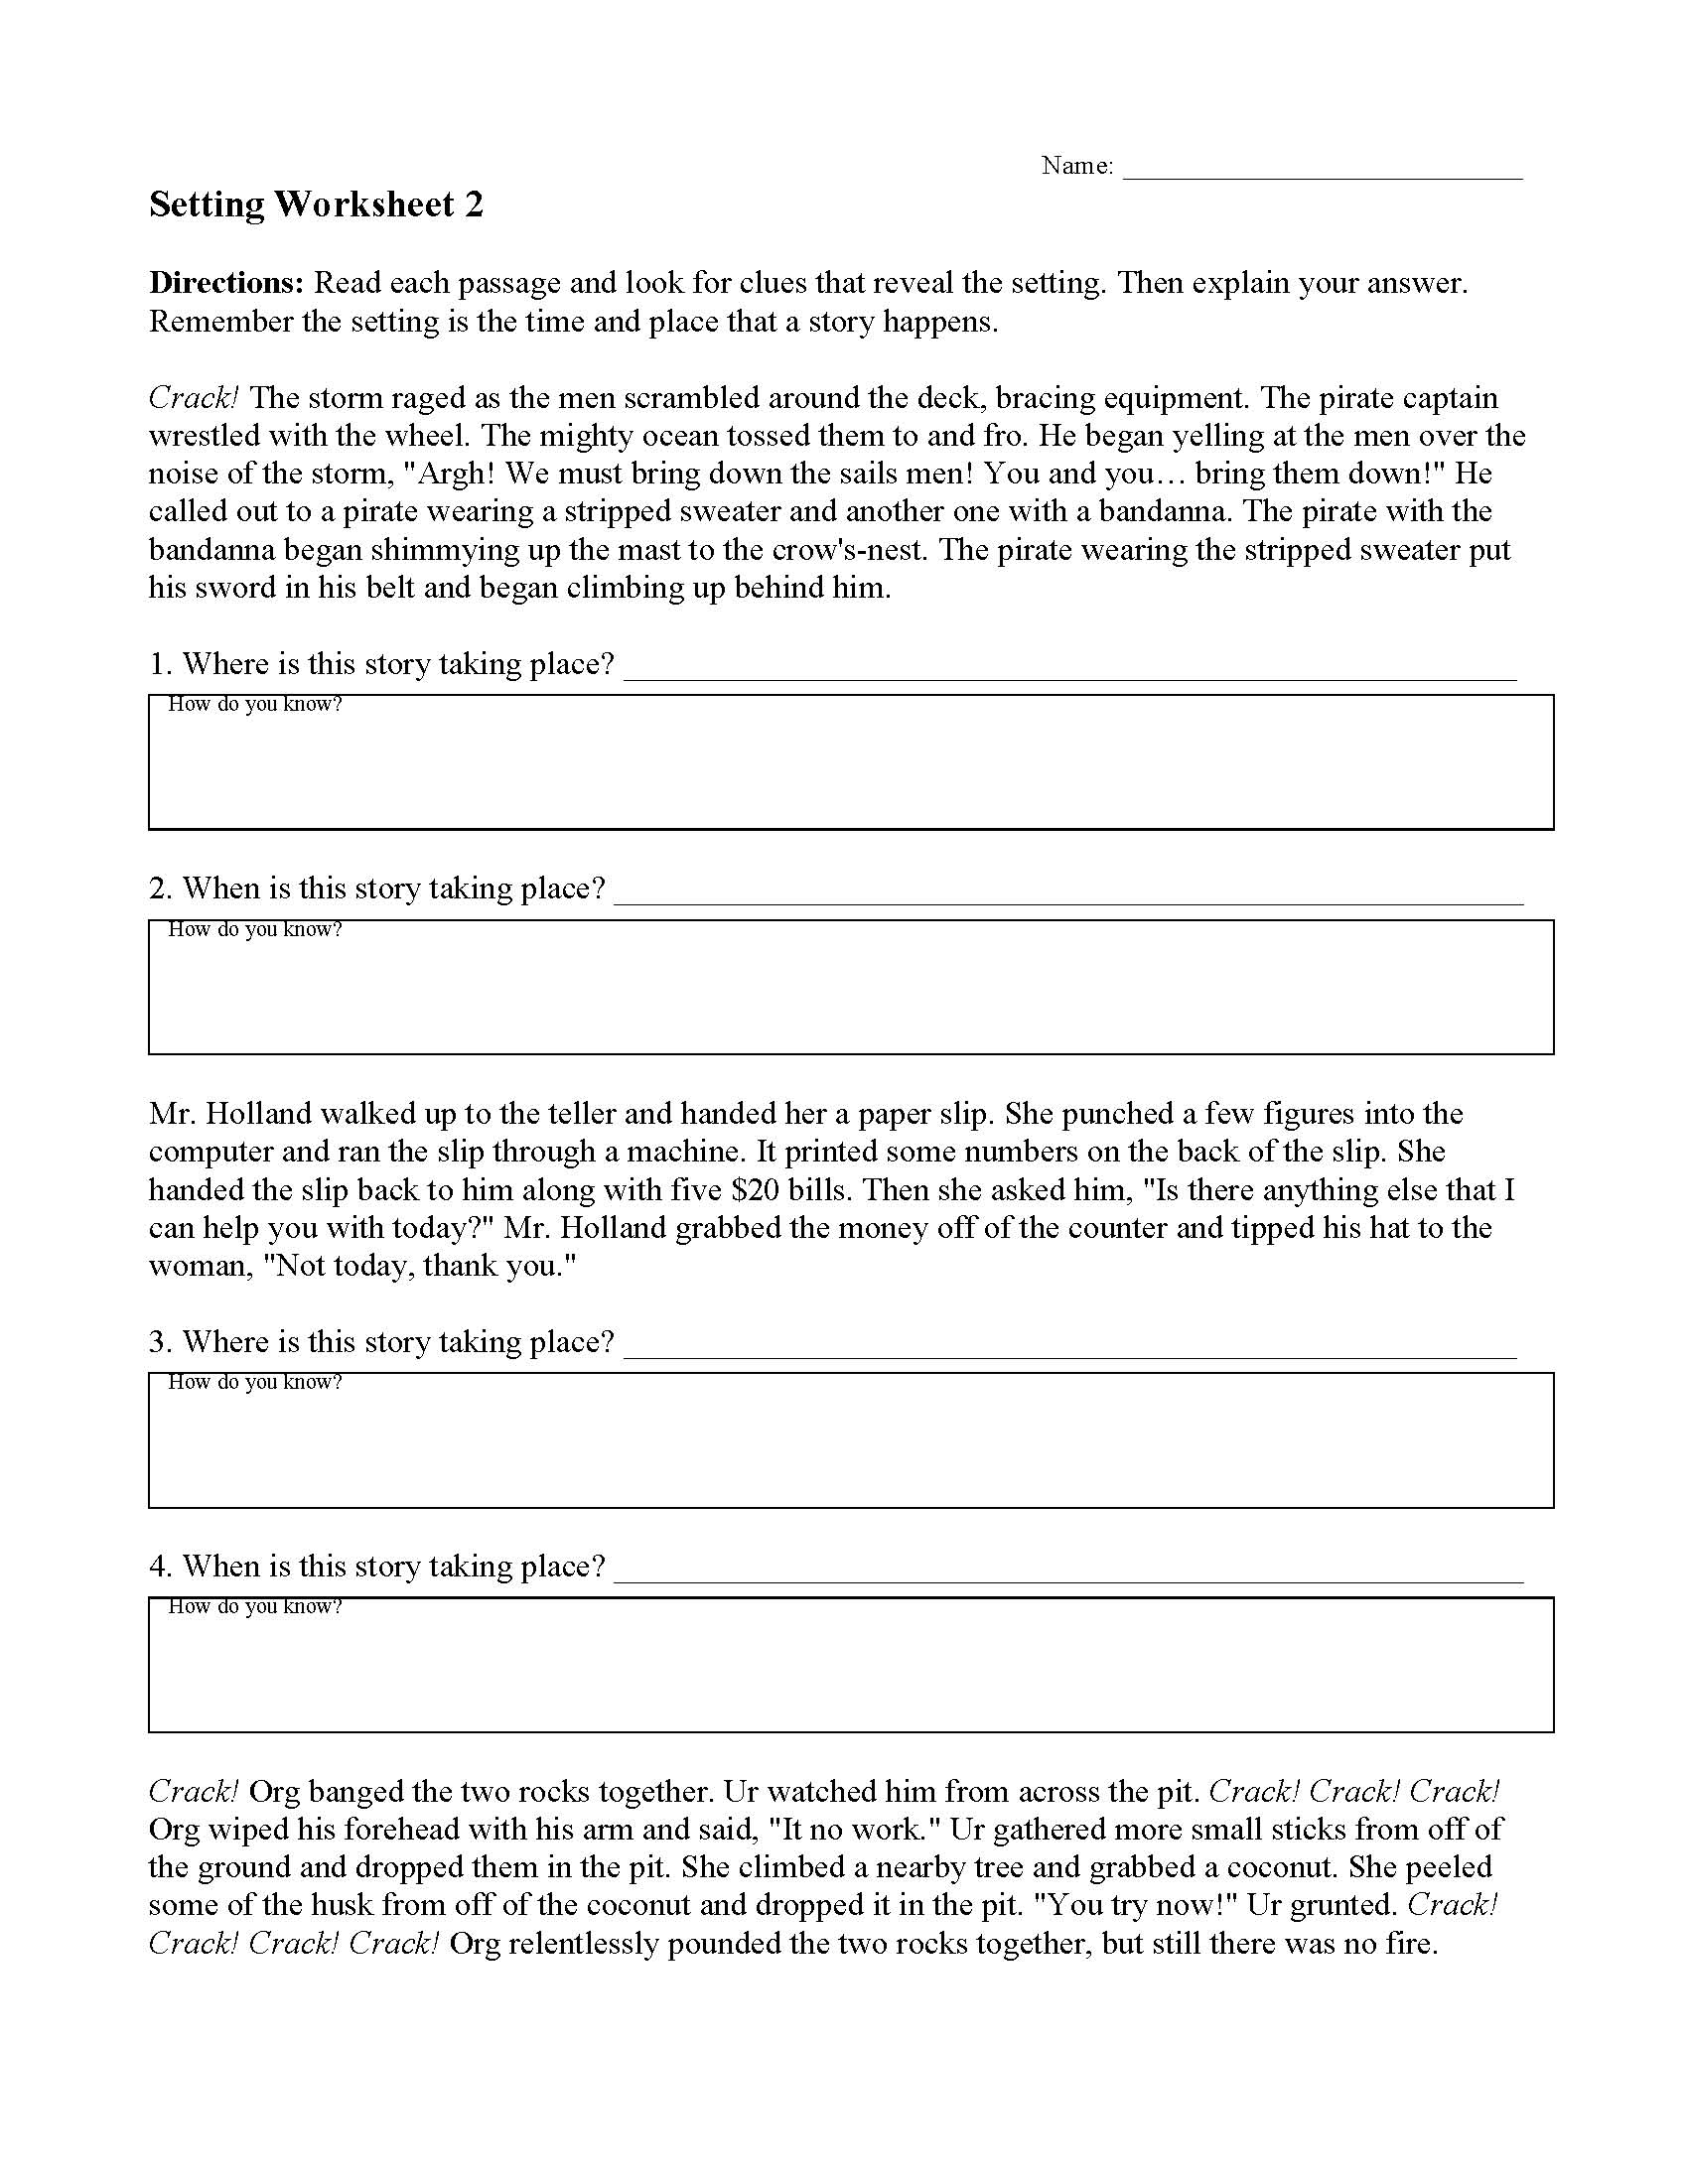 daisy-moth-foreigner-how-setting-affects-characters-worksheet